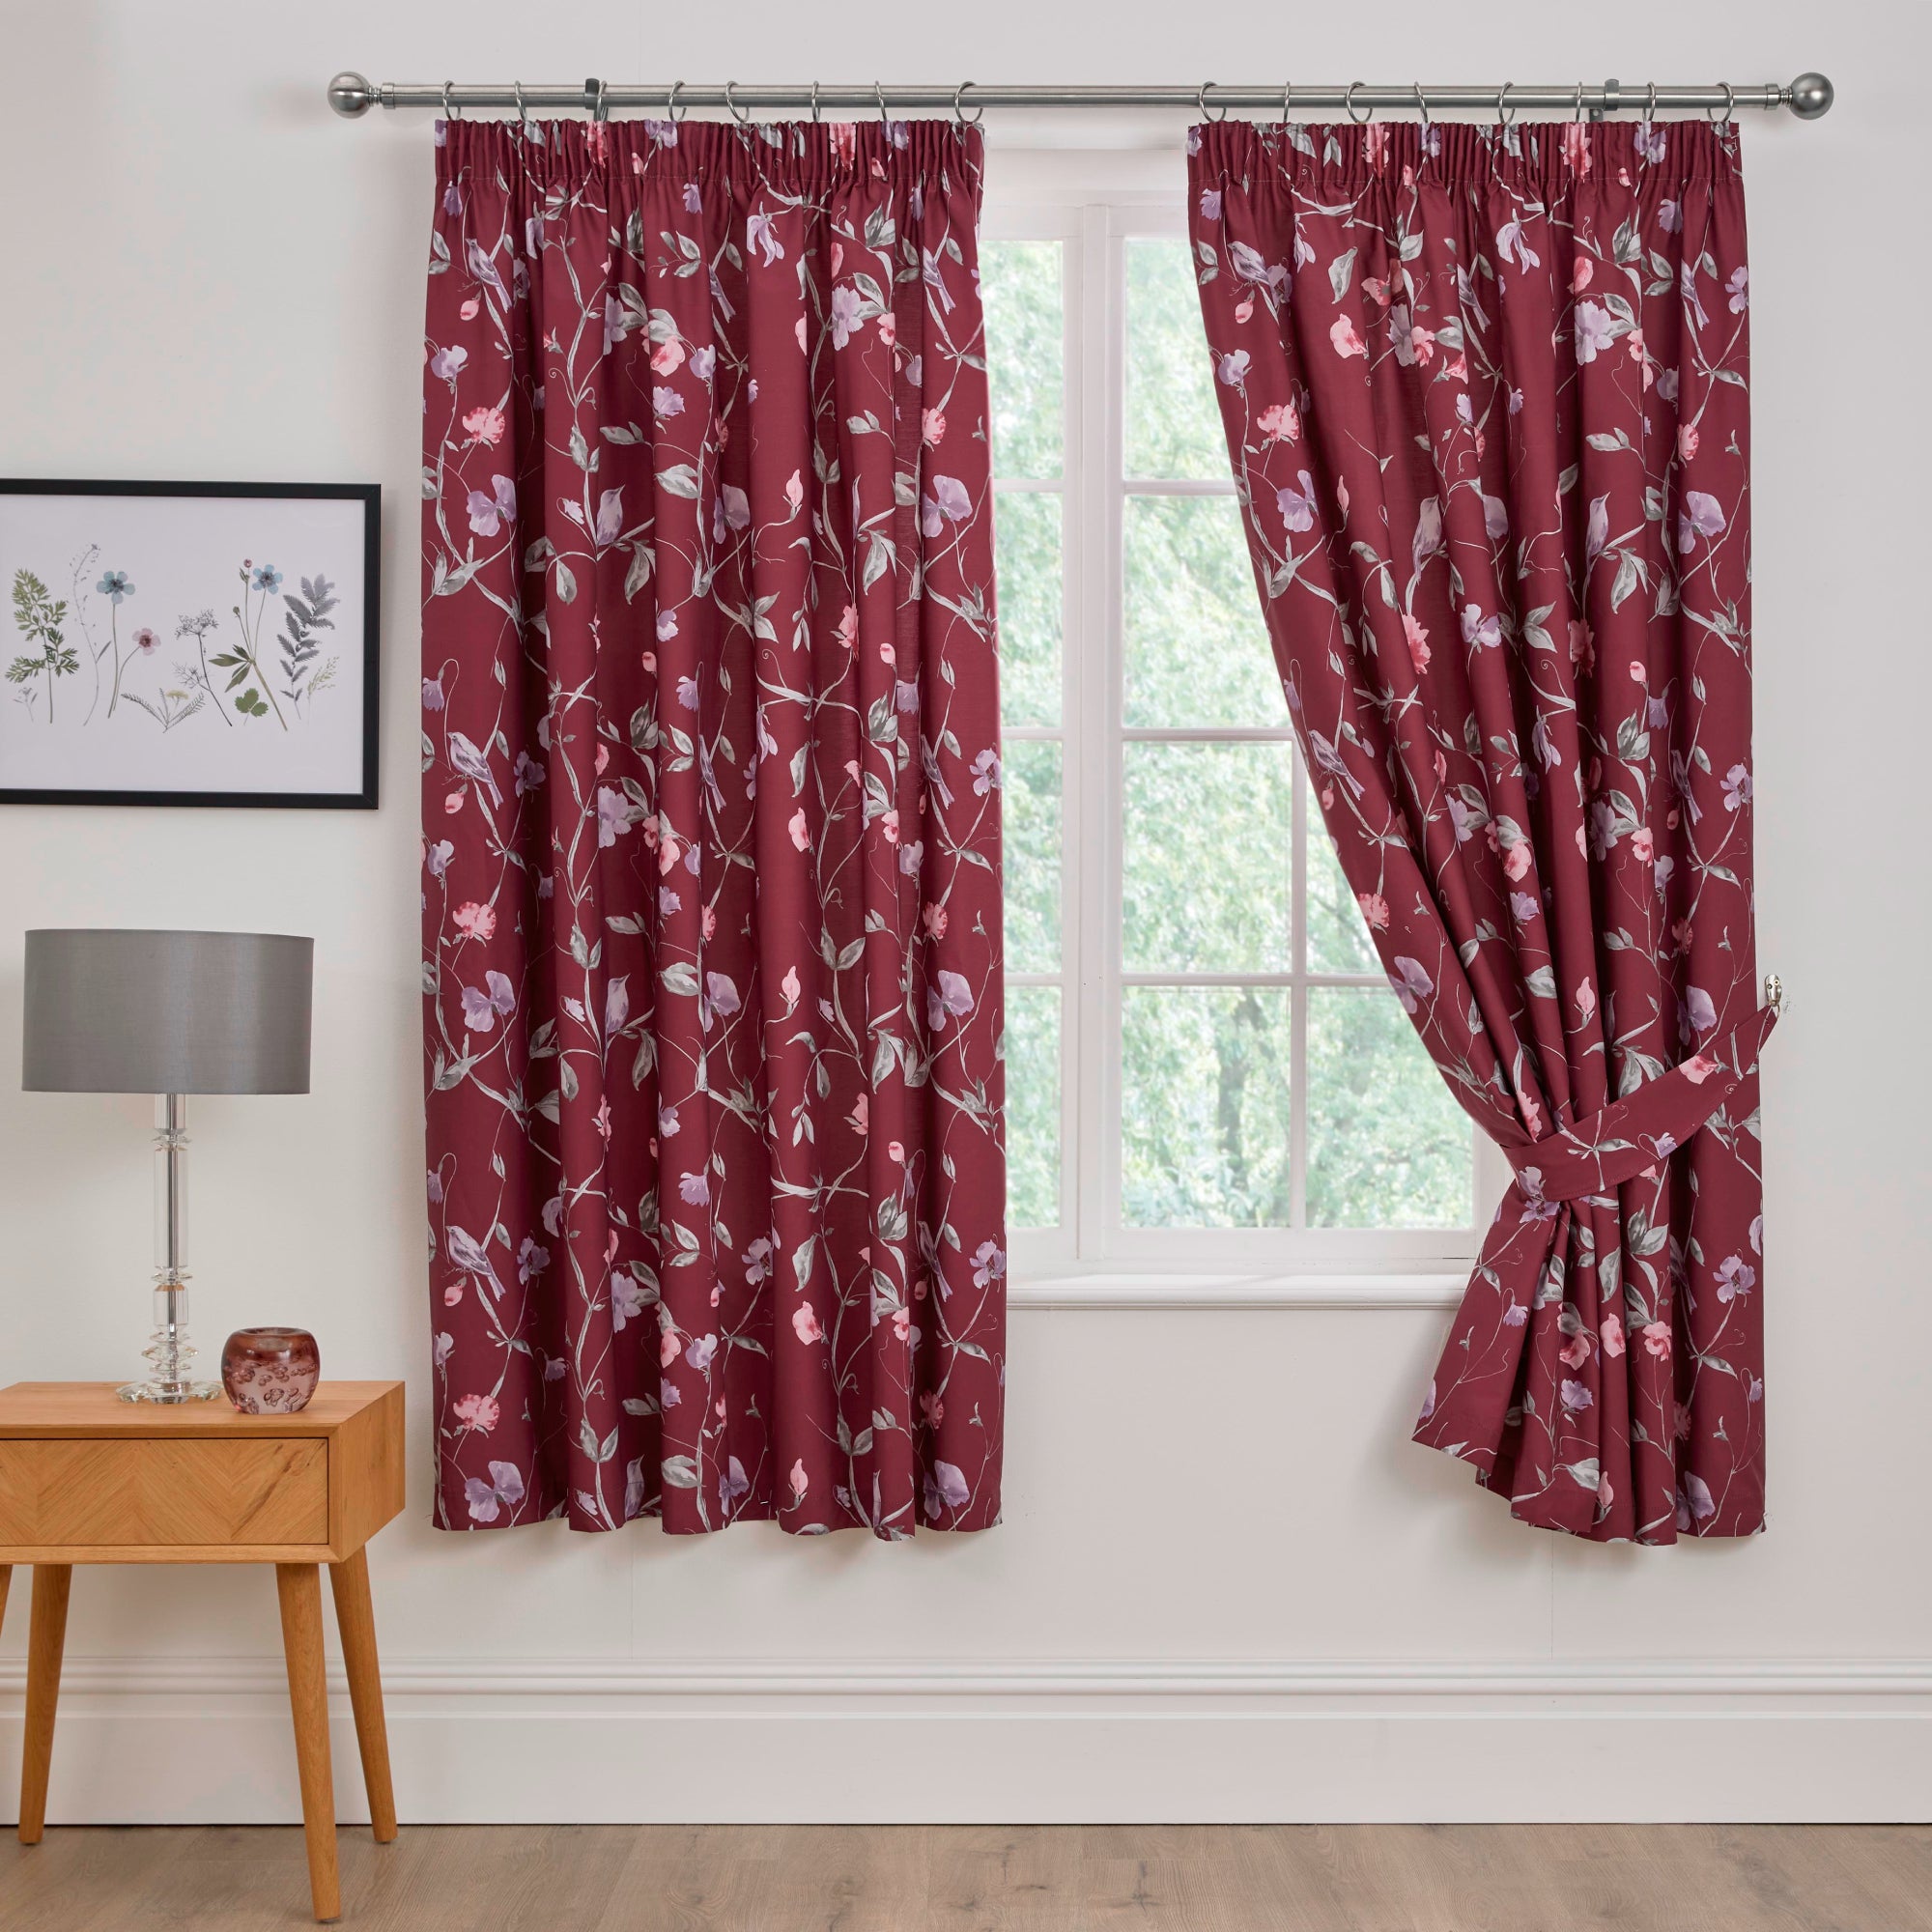 Pair of Pencil Pleat Curtains With Tie-Backs Sweet Pea by Dreams And Drapes Design in Plum